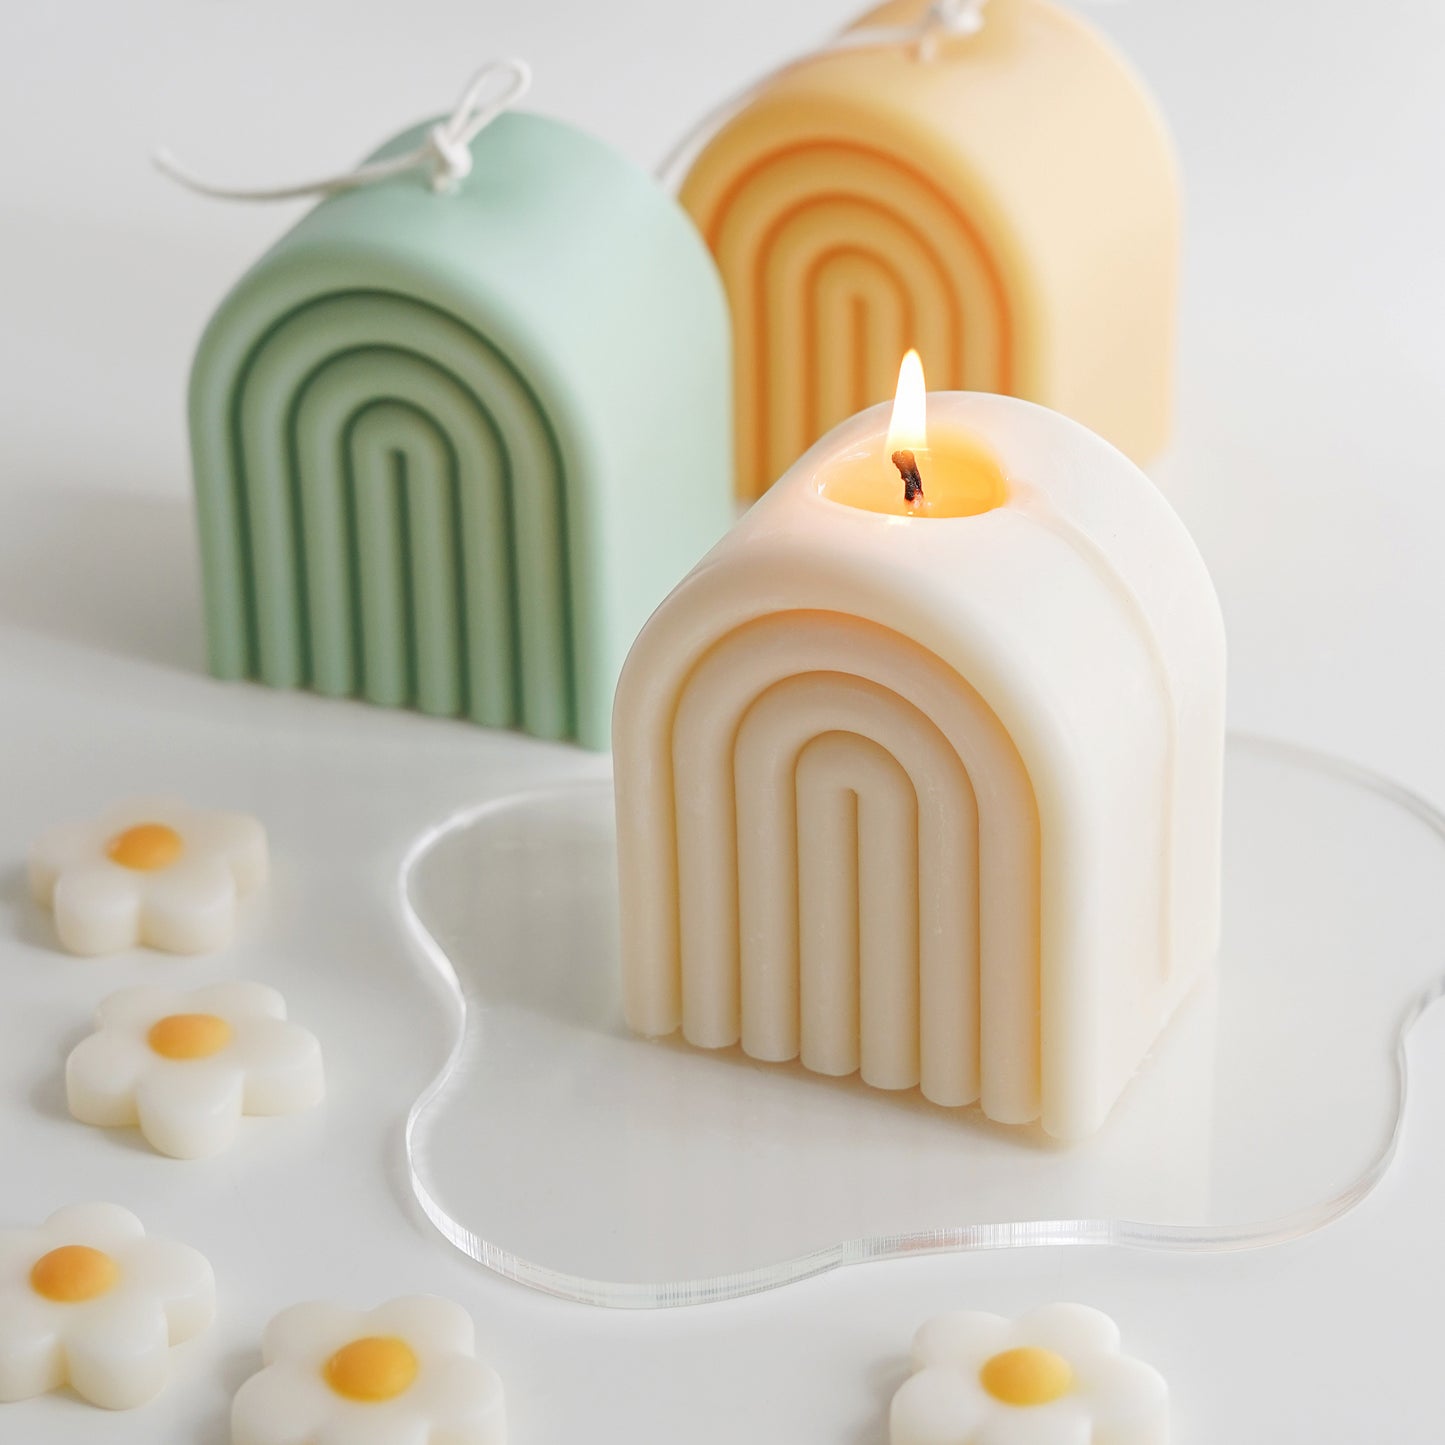 lit white rainbow soy pillar candle on a clear wavy acrylic coaster, sage green and tangerine yellow rainbow shaped sculptural soy pillar candles with long cotton wicks, and daisy flower shape wax melts on the white table